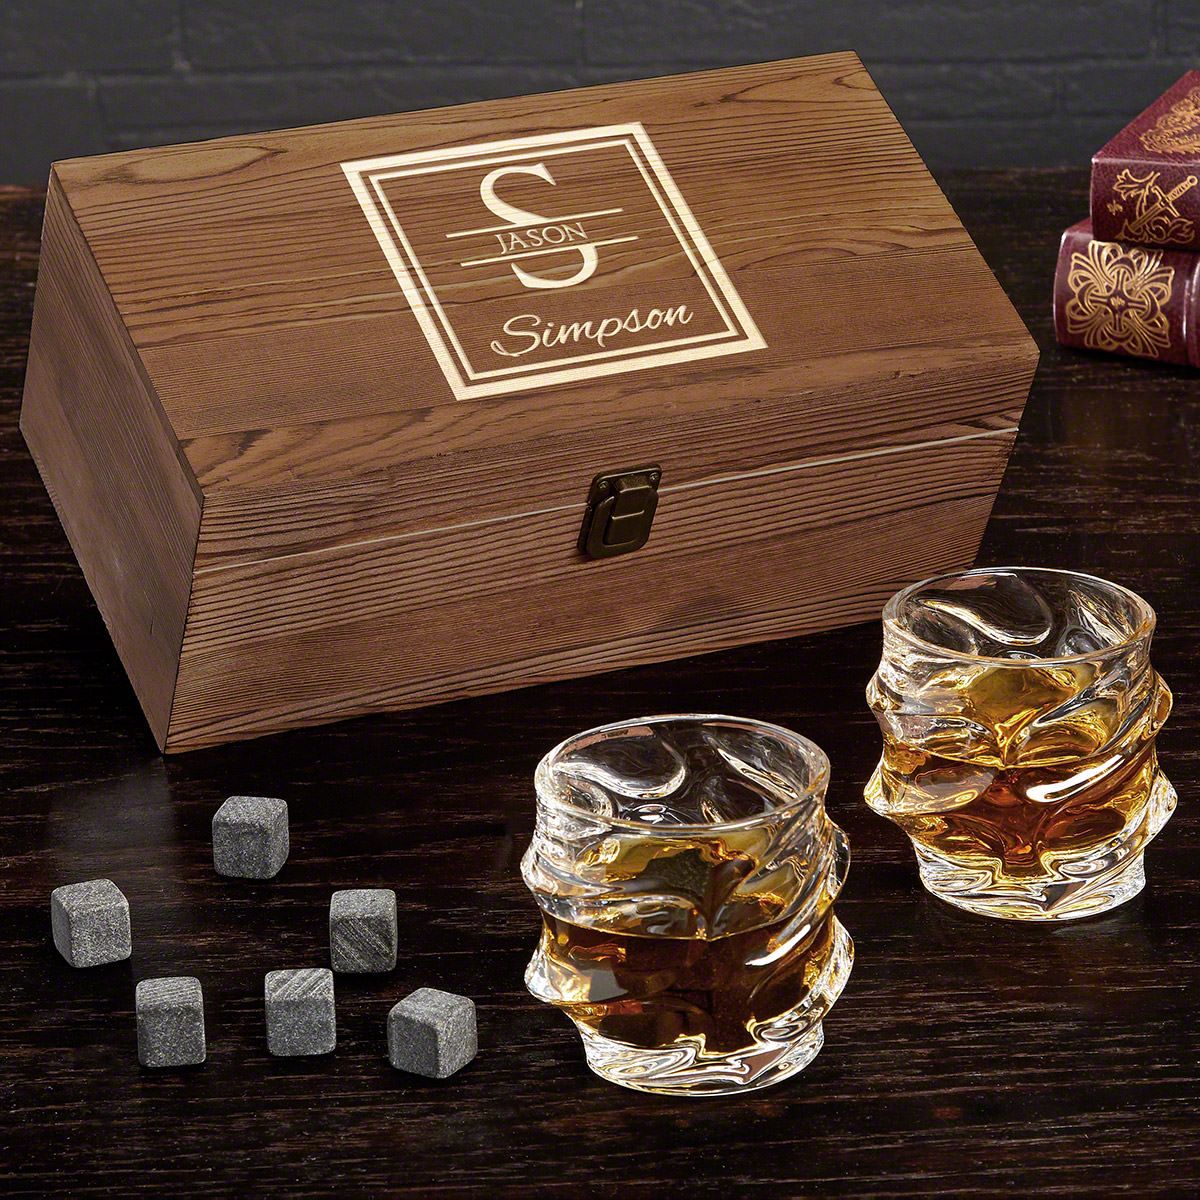 Whisky Stones and Glass Gift Set,2 Crystal Glasses +6 Whisky Rocks+ Ice Tongs in Wooden Gift Box Dad Men Husband Christmas/Birthday Present for Whiskey Lover 